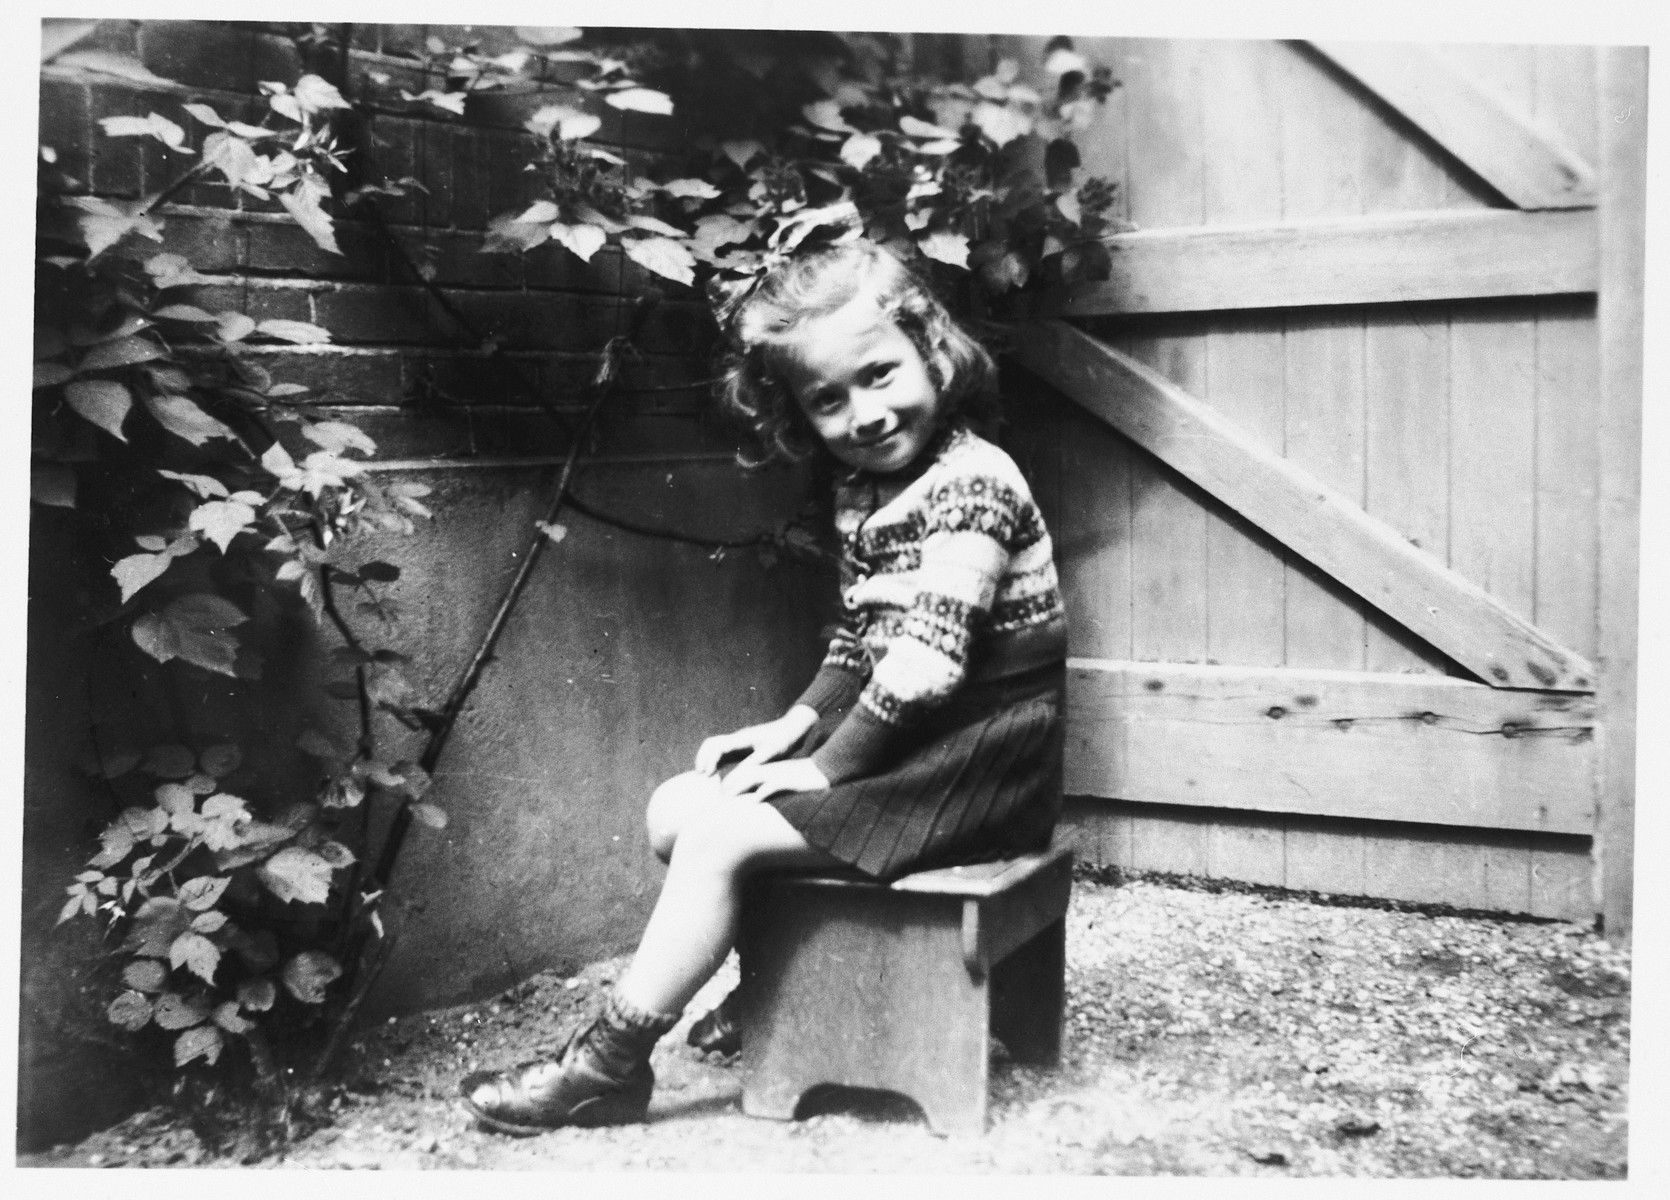 A young Jewish child sits in the garden of her Dutch rescuers' home wearing a sweater made by her mother prior to her deportation.

Pictured is Truusje Schoenfeld just before leaving the home of her rescuers to return to Amsterdam after the war.